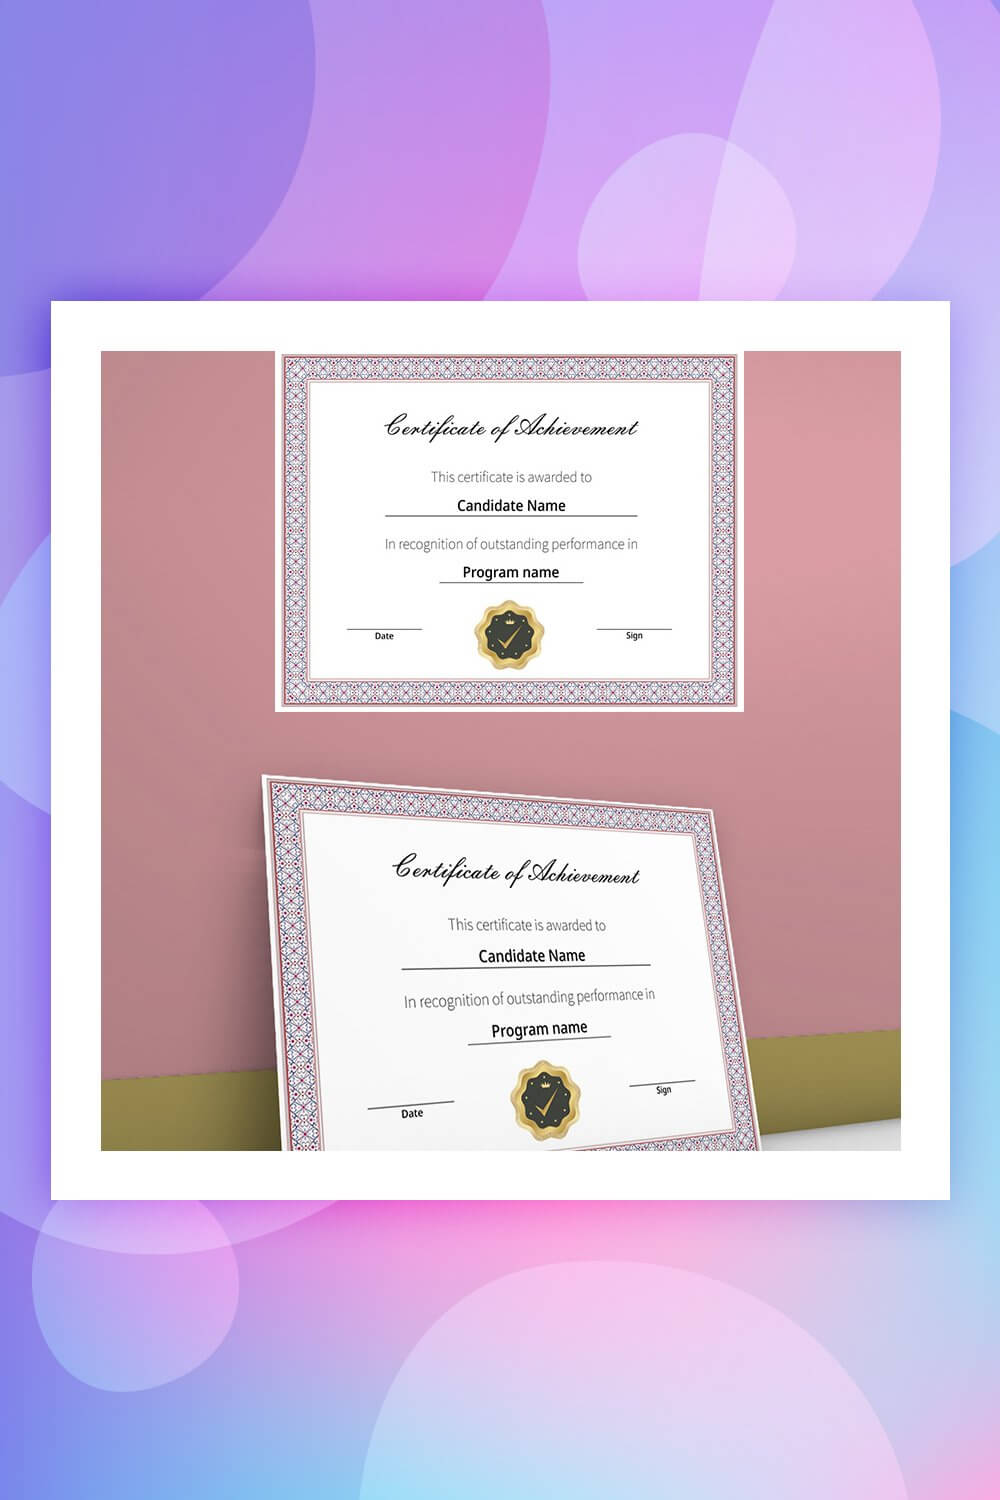 28 Attention Grabbing Certificate Templates – Colorlib Within No Certificate Templates Could Be Found